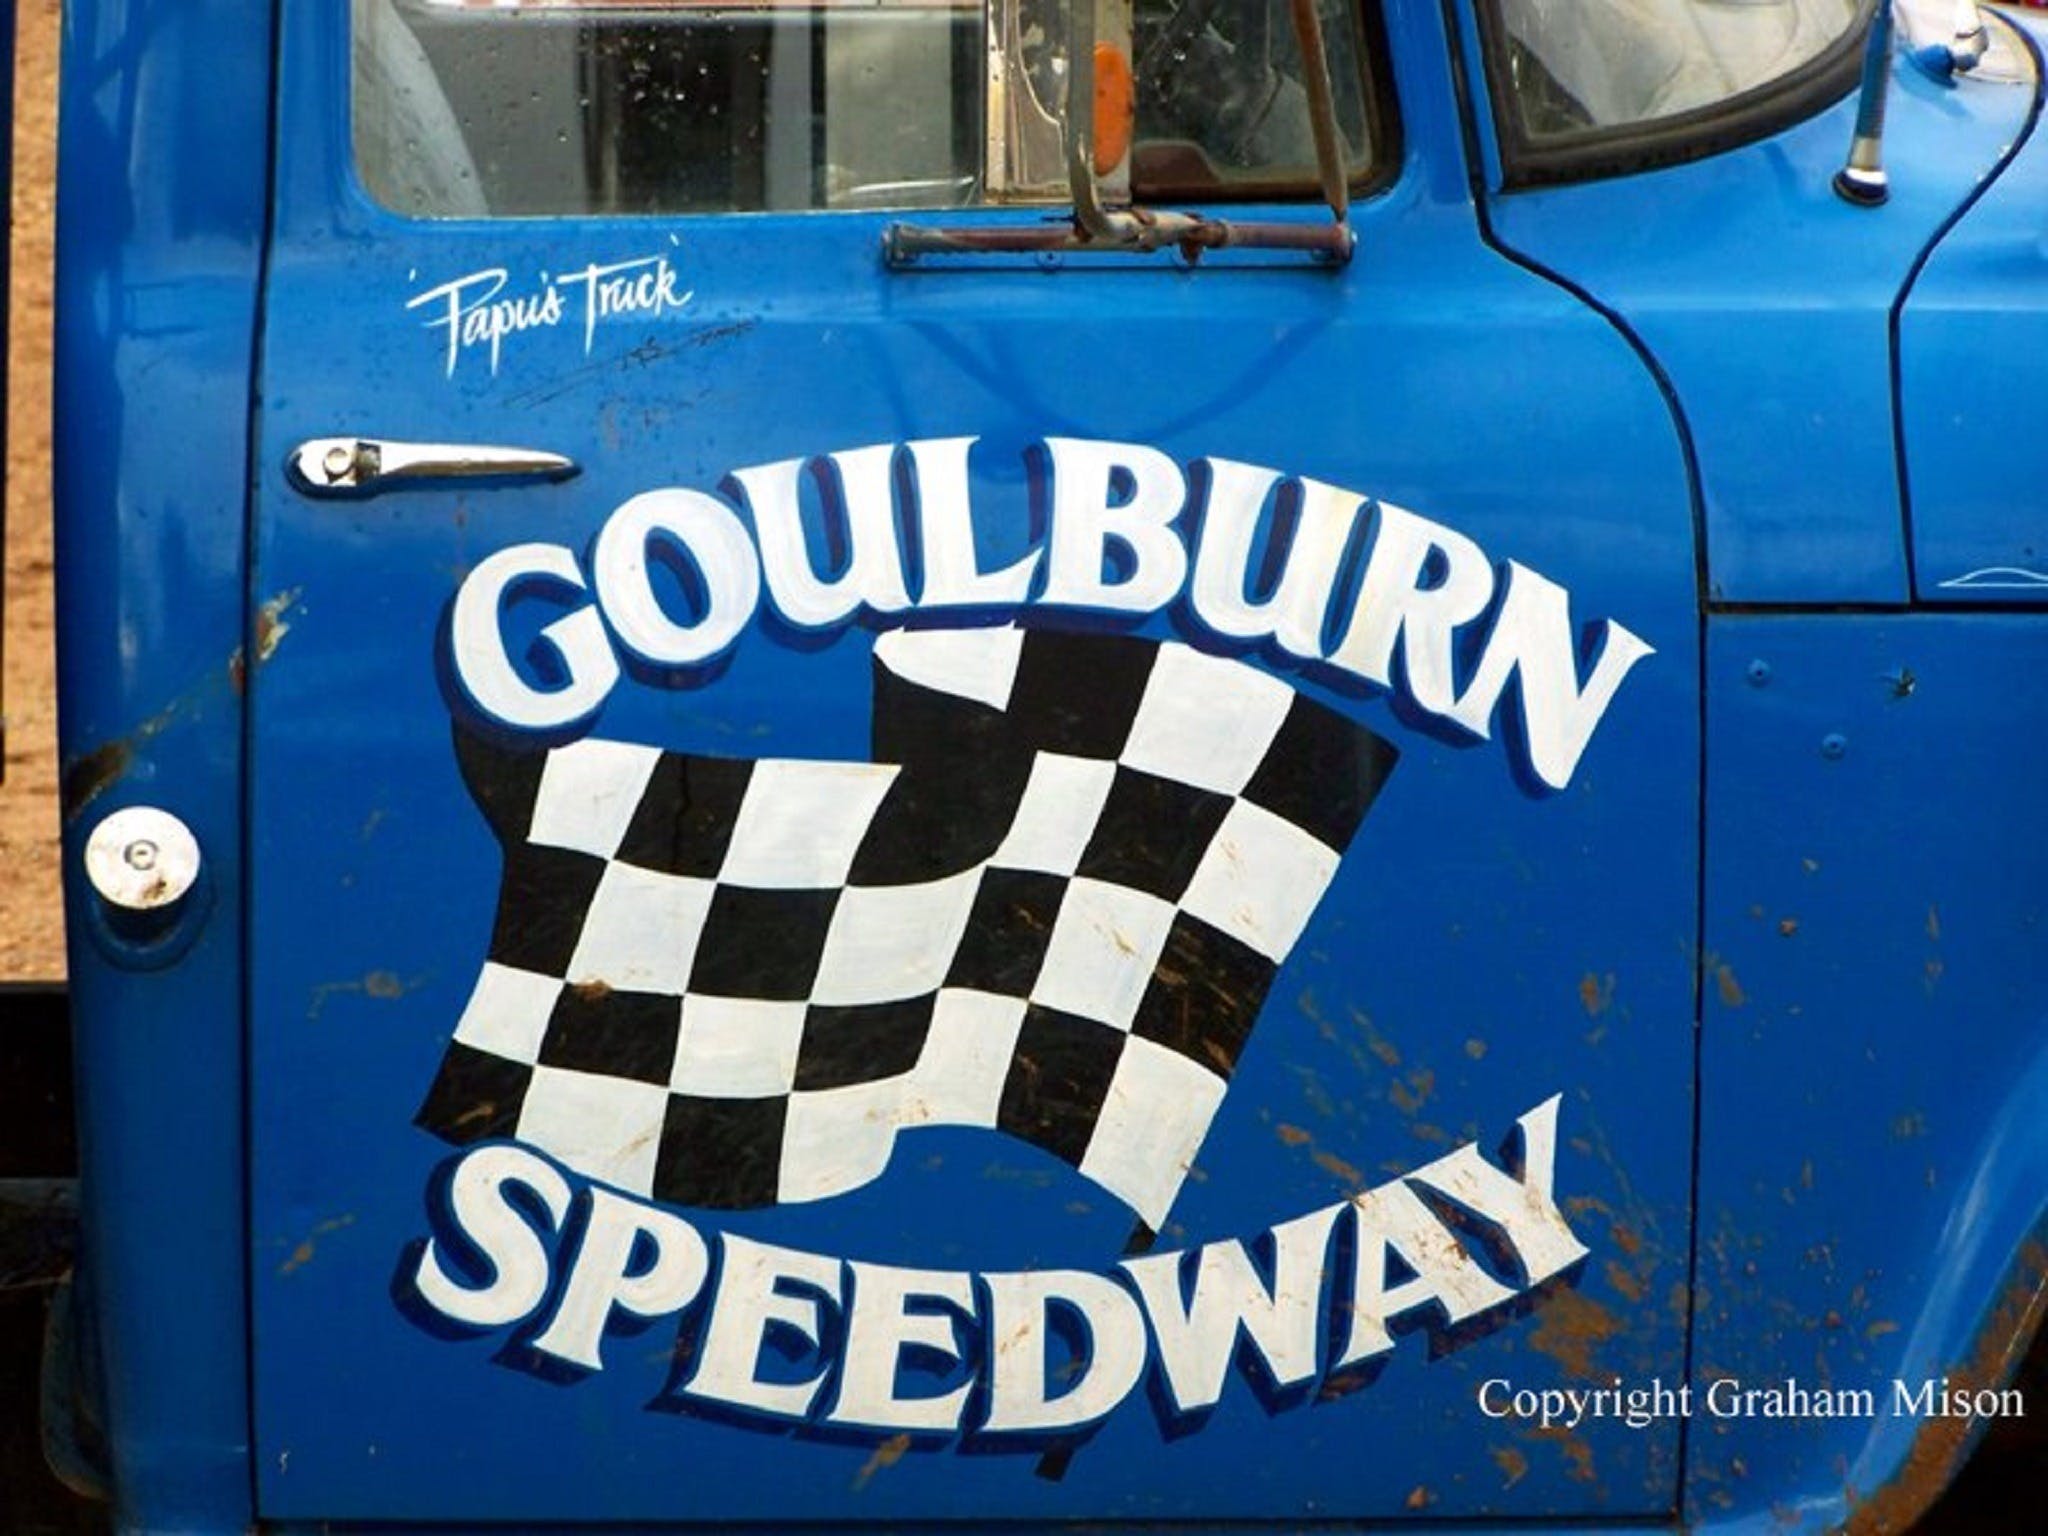 50 years of racing at Goulburn Speedway - Lennox Head Accommodation